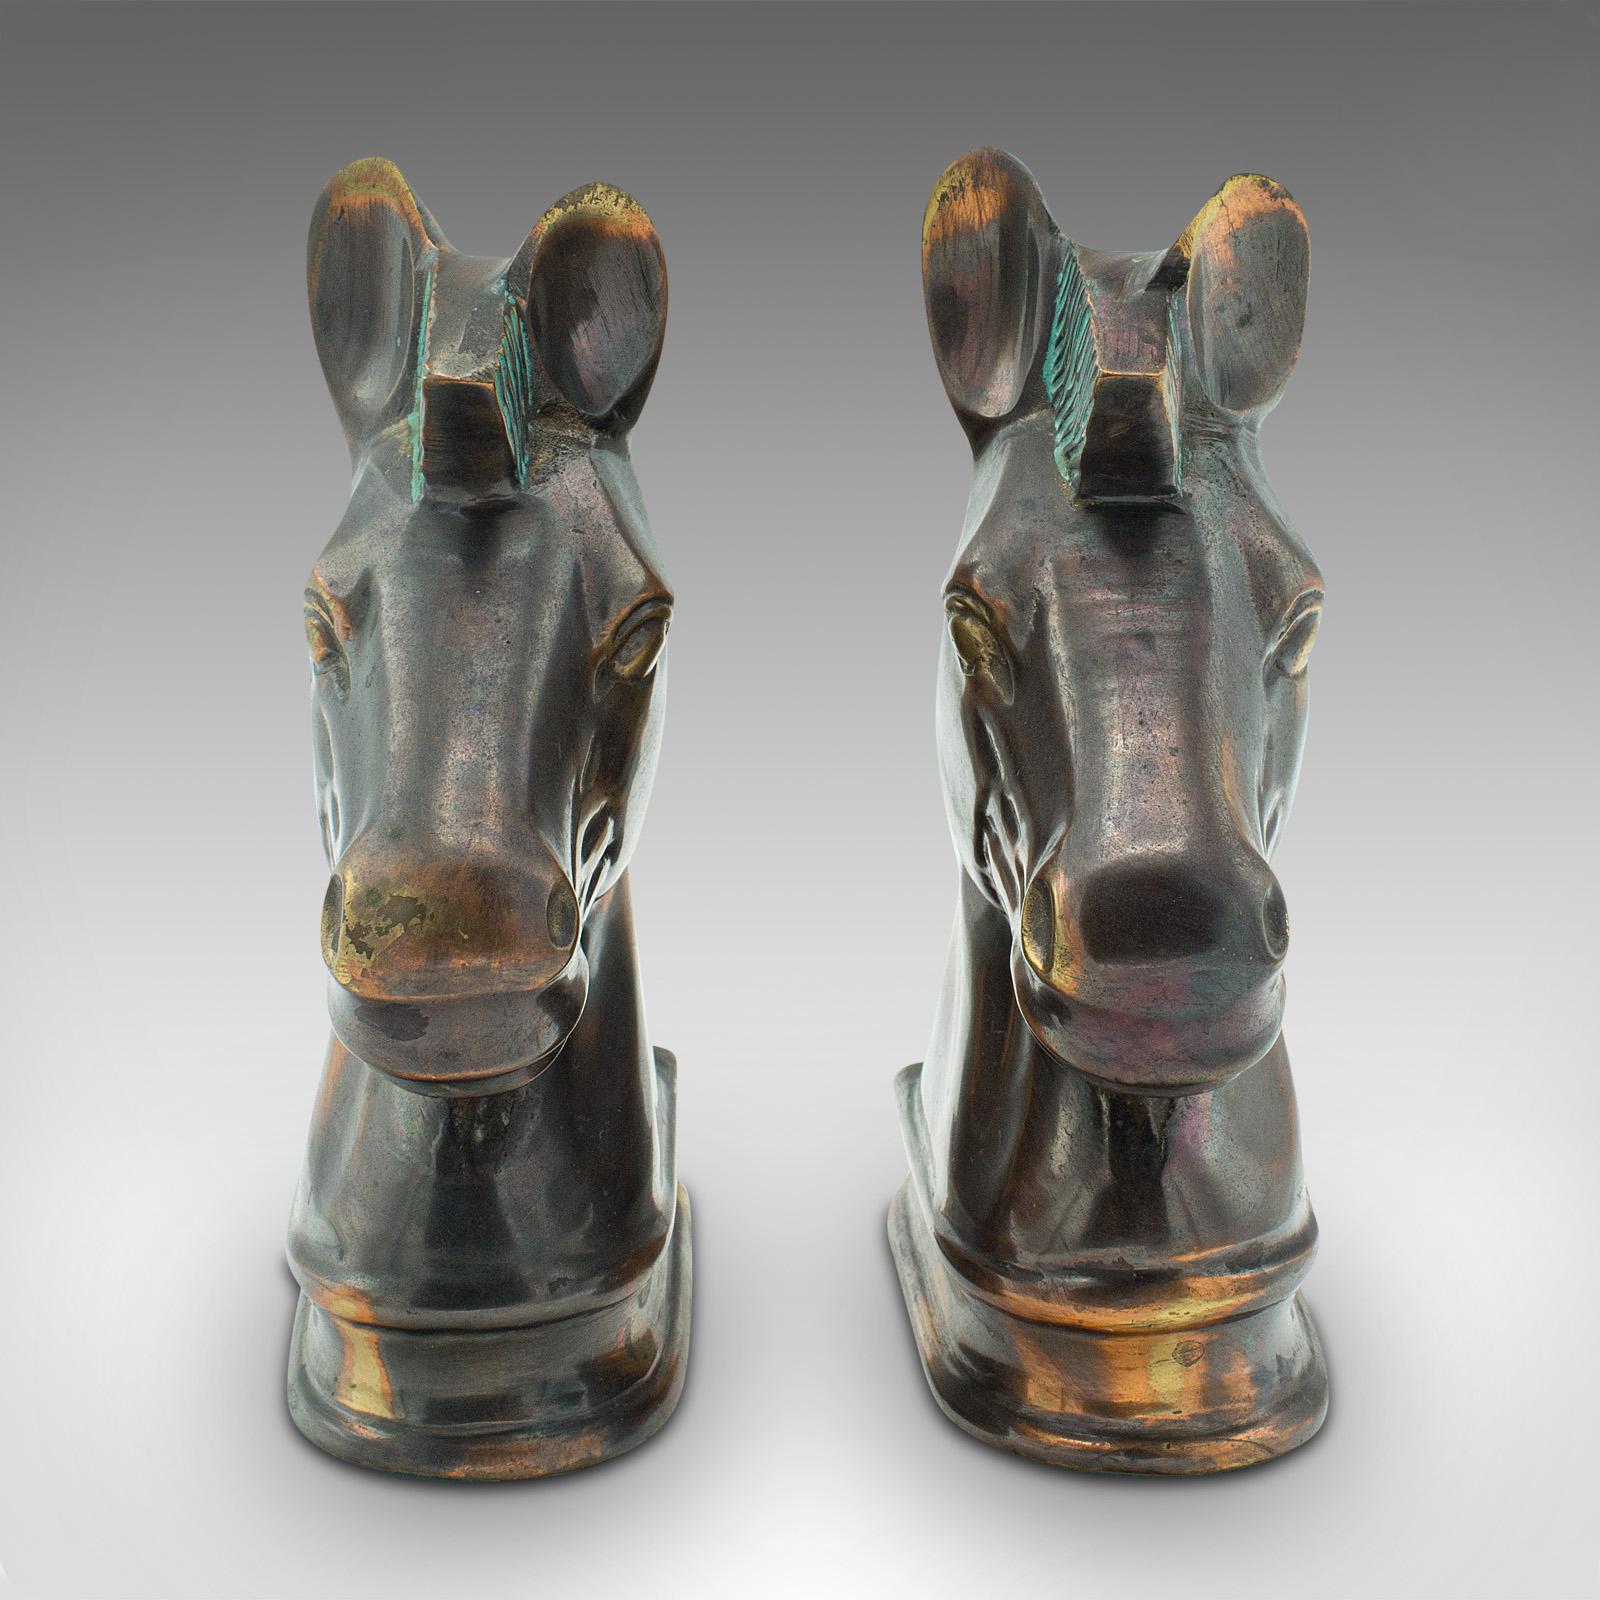 This is a pair of vintage horse bust bookends. An English, cast brass decorative novel rest, dating to the late 20th century, circa 1970.

Wonderful equine interest with great colour, ideal for the desktop
Displaying a desirable aged patina and